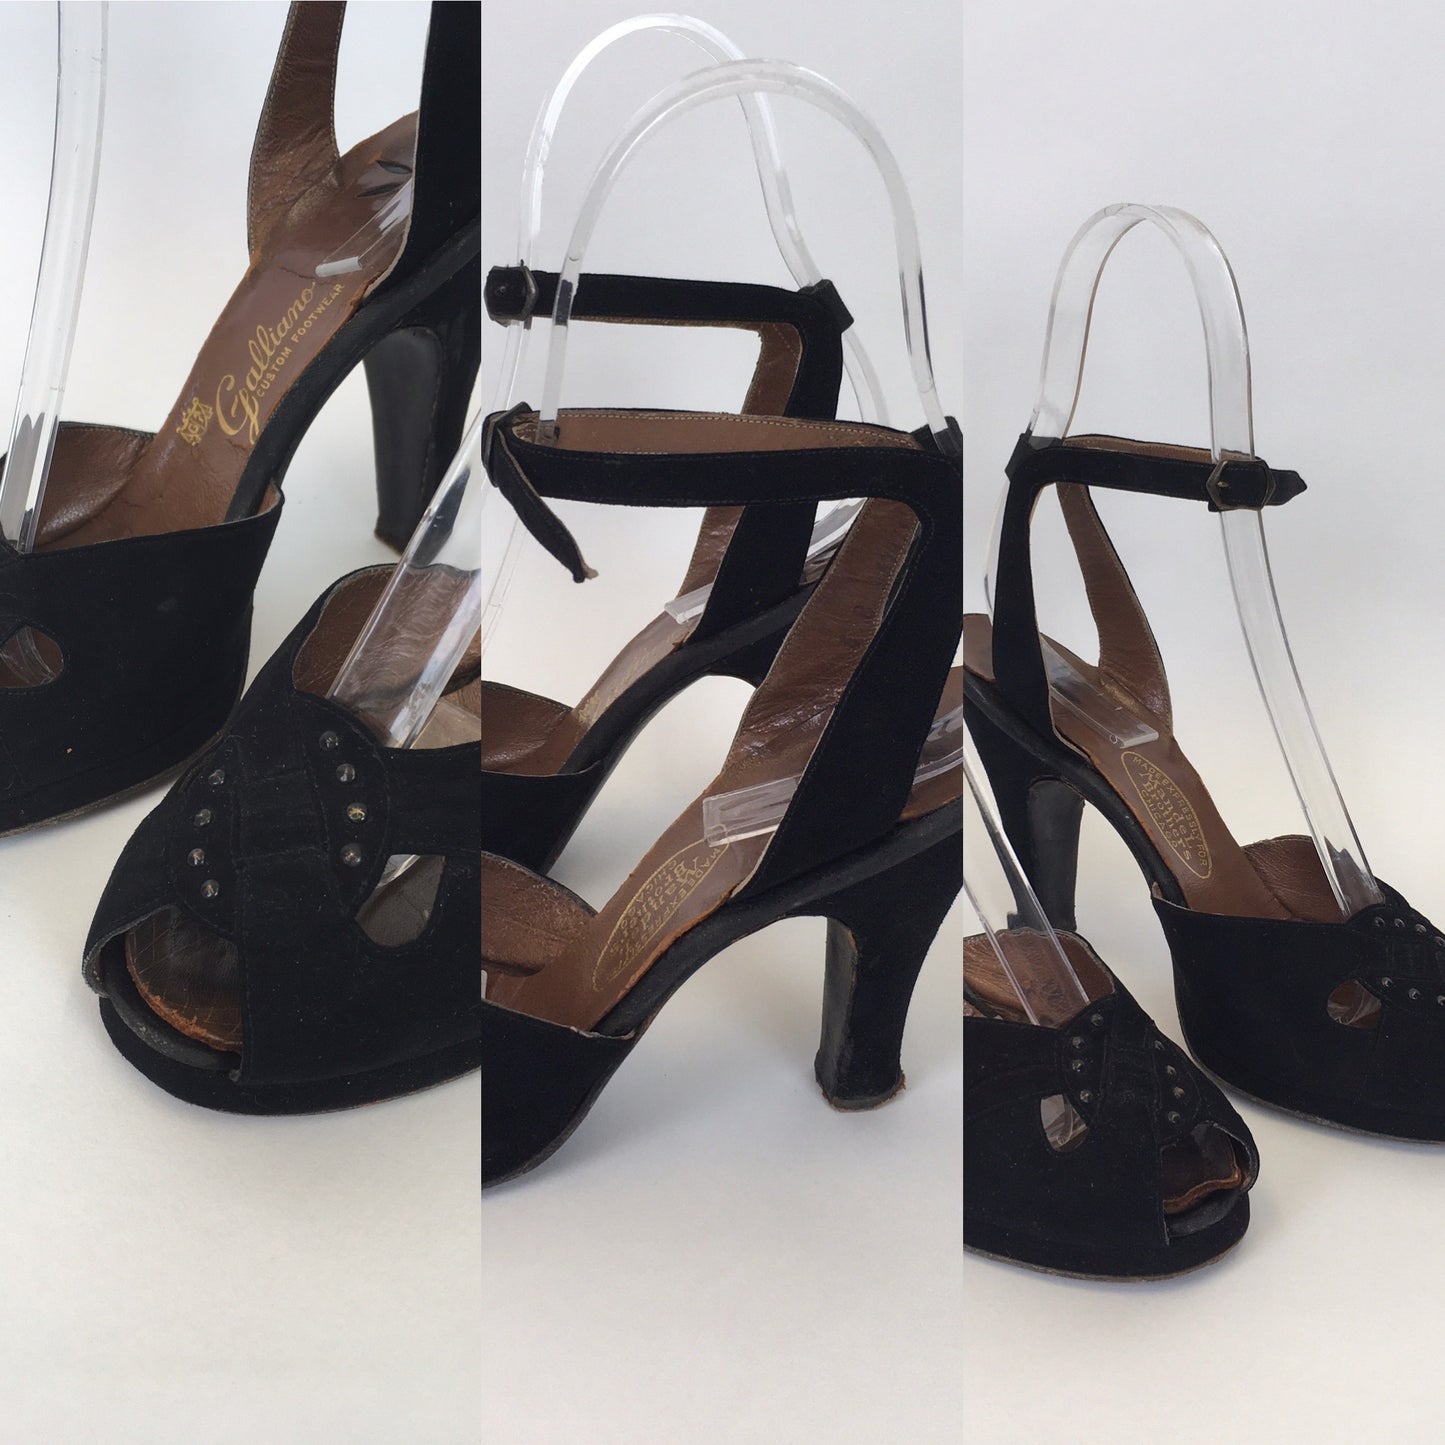 Original 1940s Black Suede Heels - With Peep toe Front Detailing and Buckled Ankle Strap